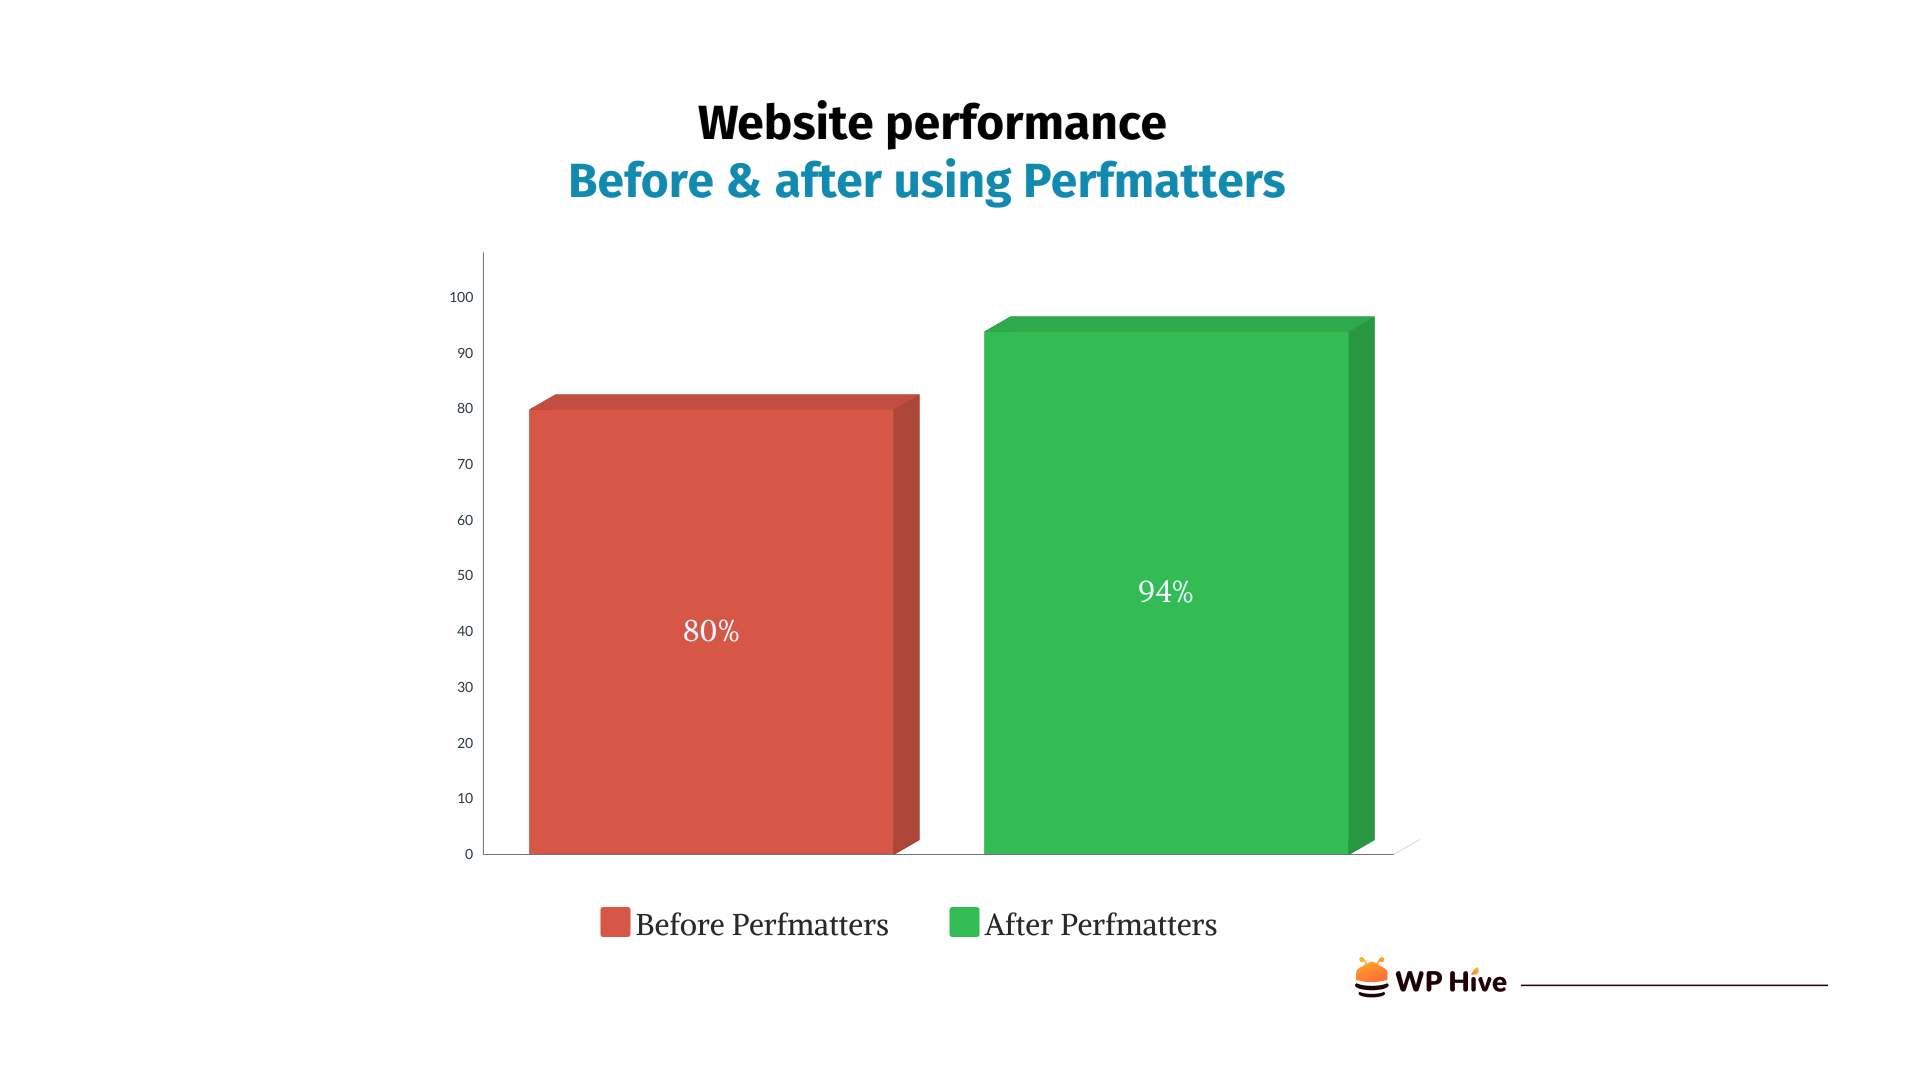 Graph: The website performance increased by 17.5%